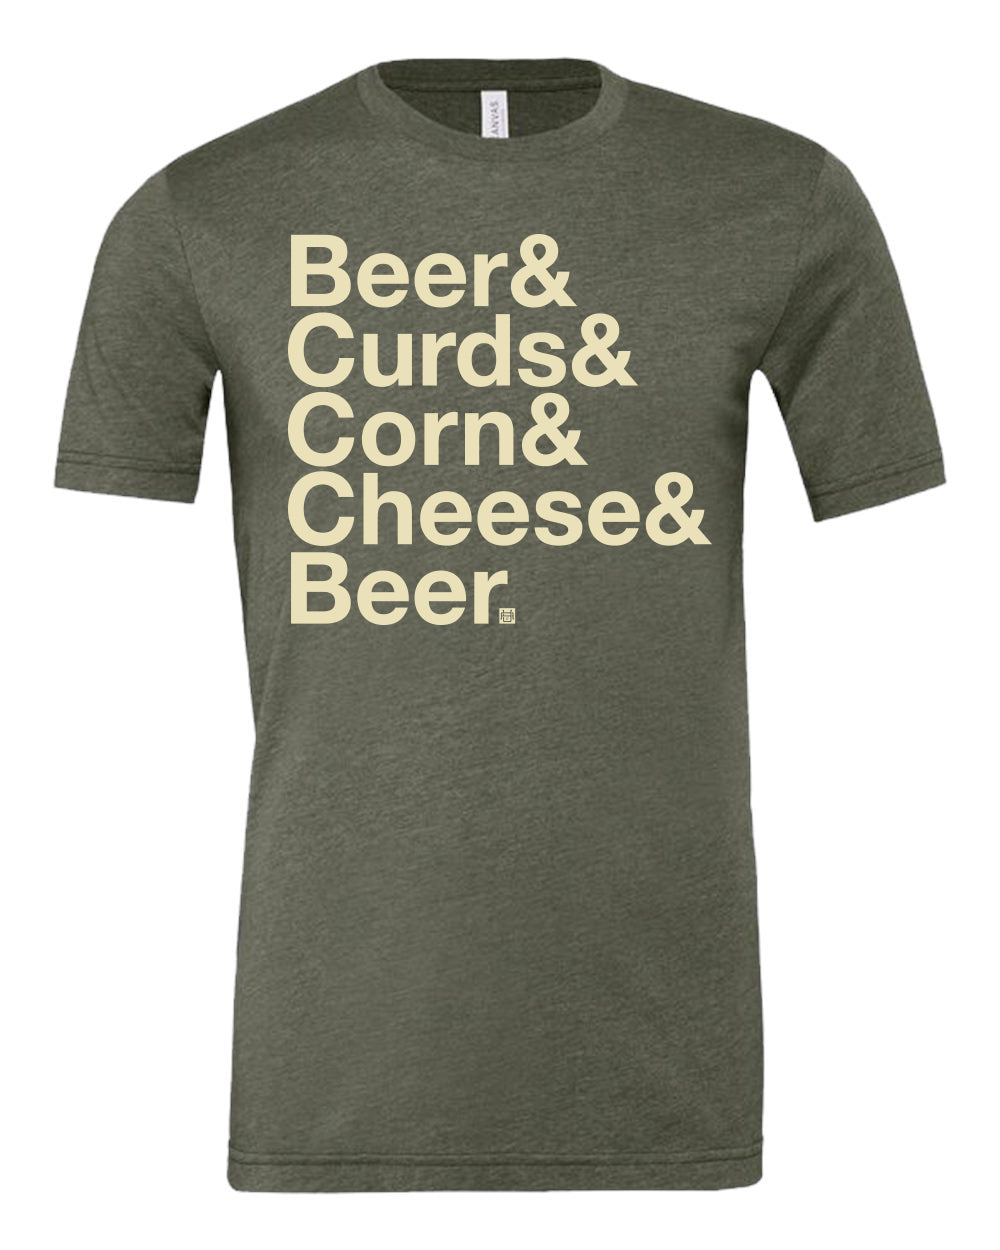 Military green t-shirt with Beer & Curds & Corn & Cheese & Beer in cream ink